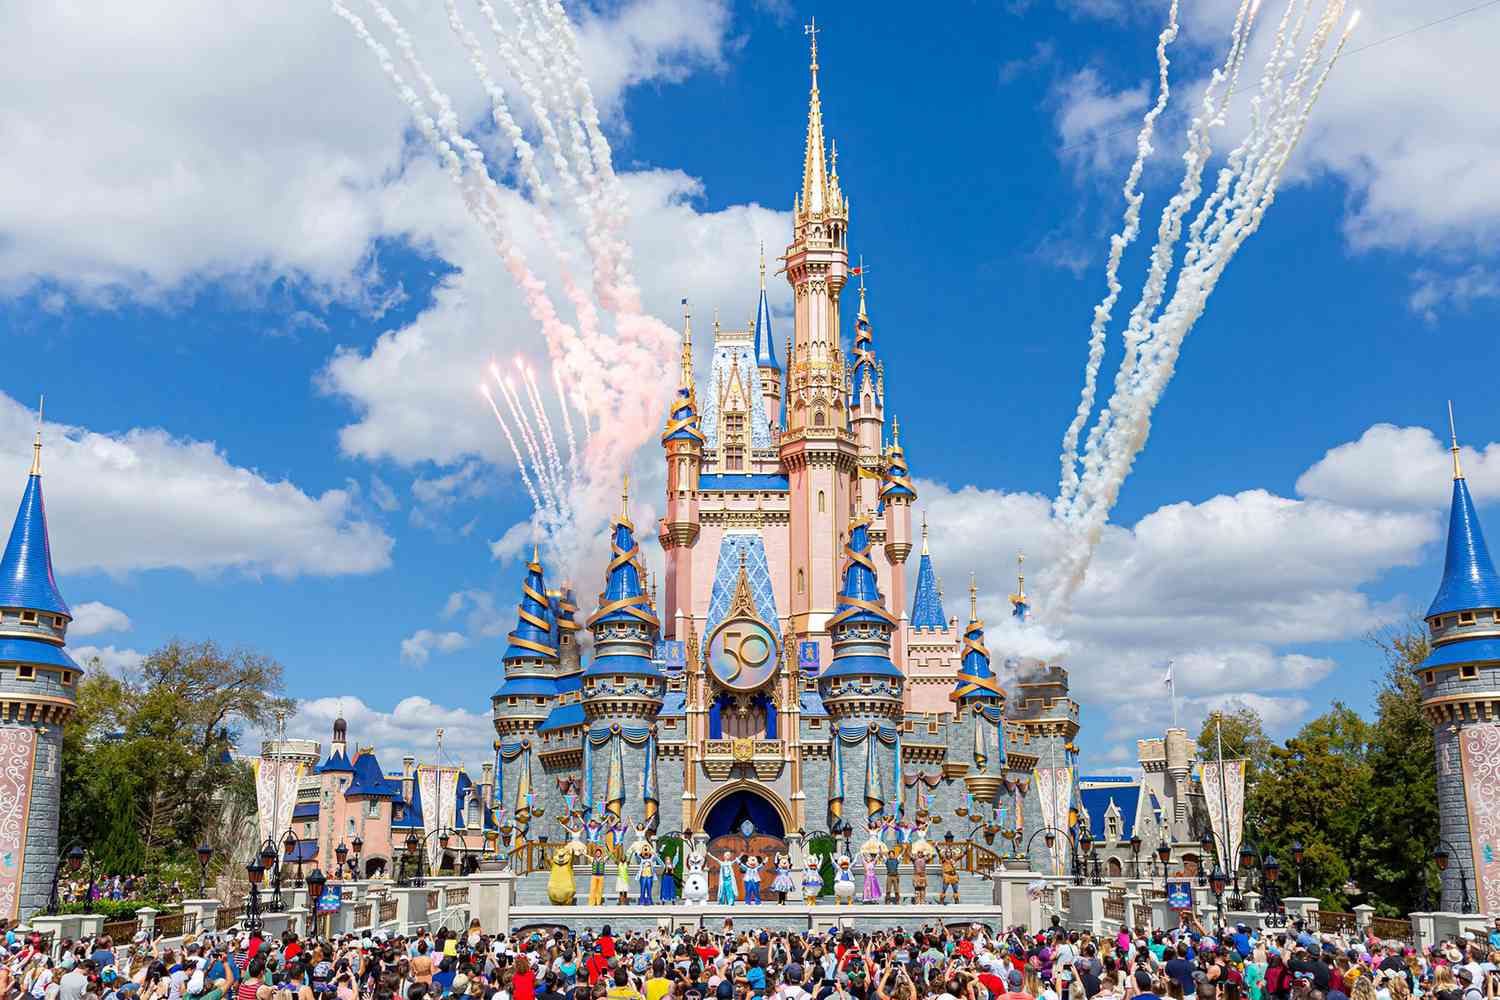 What To Pack For A Disneyland Trip: 41 Essentials To Bring